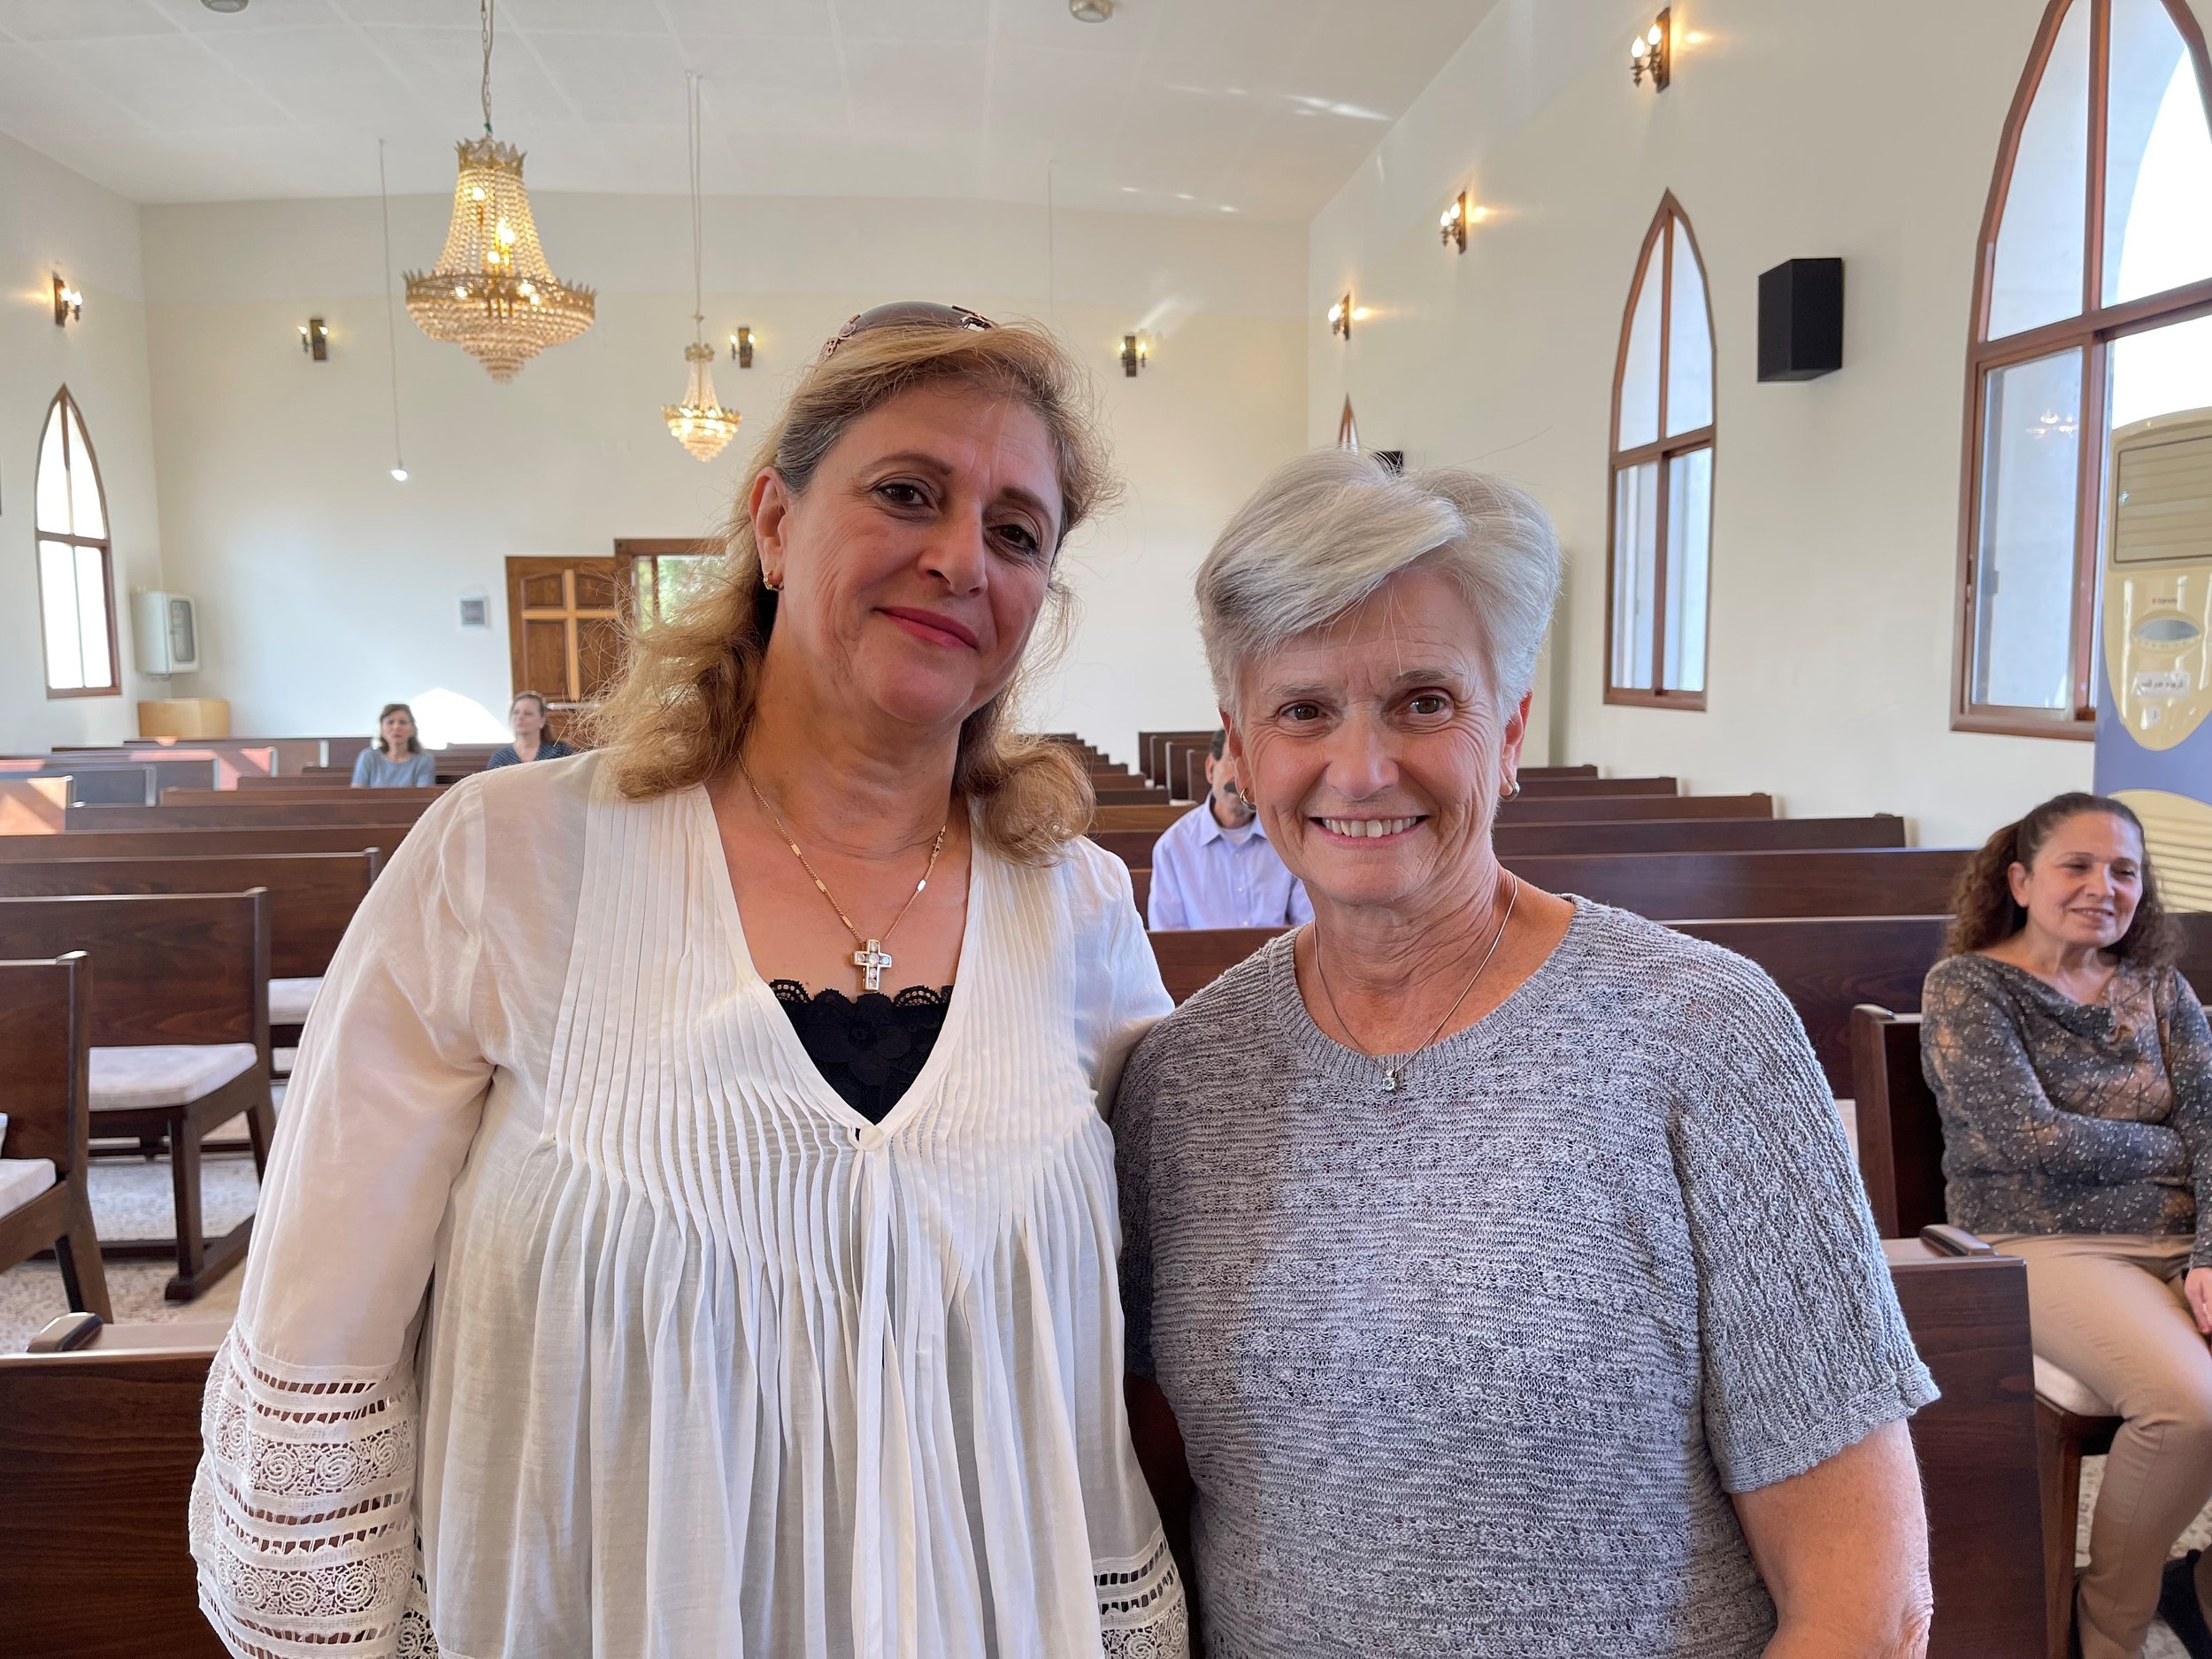  In Fairouzeh, Lois was reunited with a friend she had made in 2019 at the women’s conference in Lebanon 